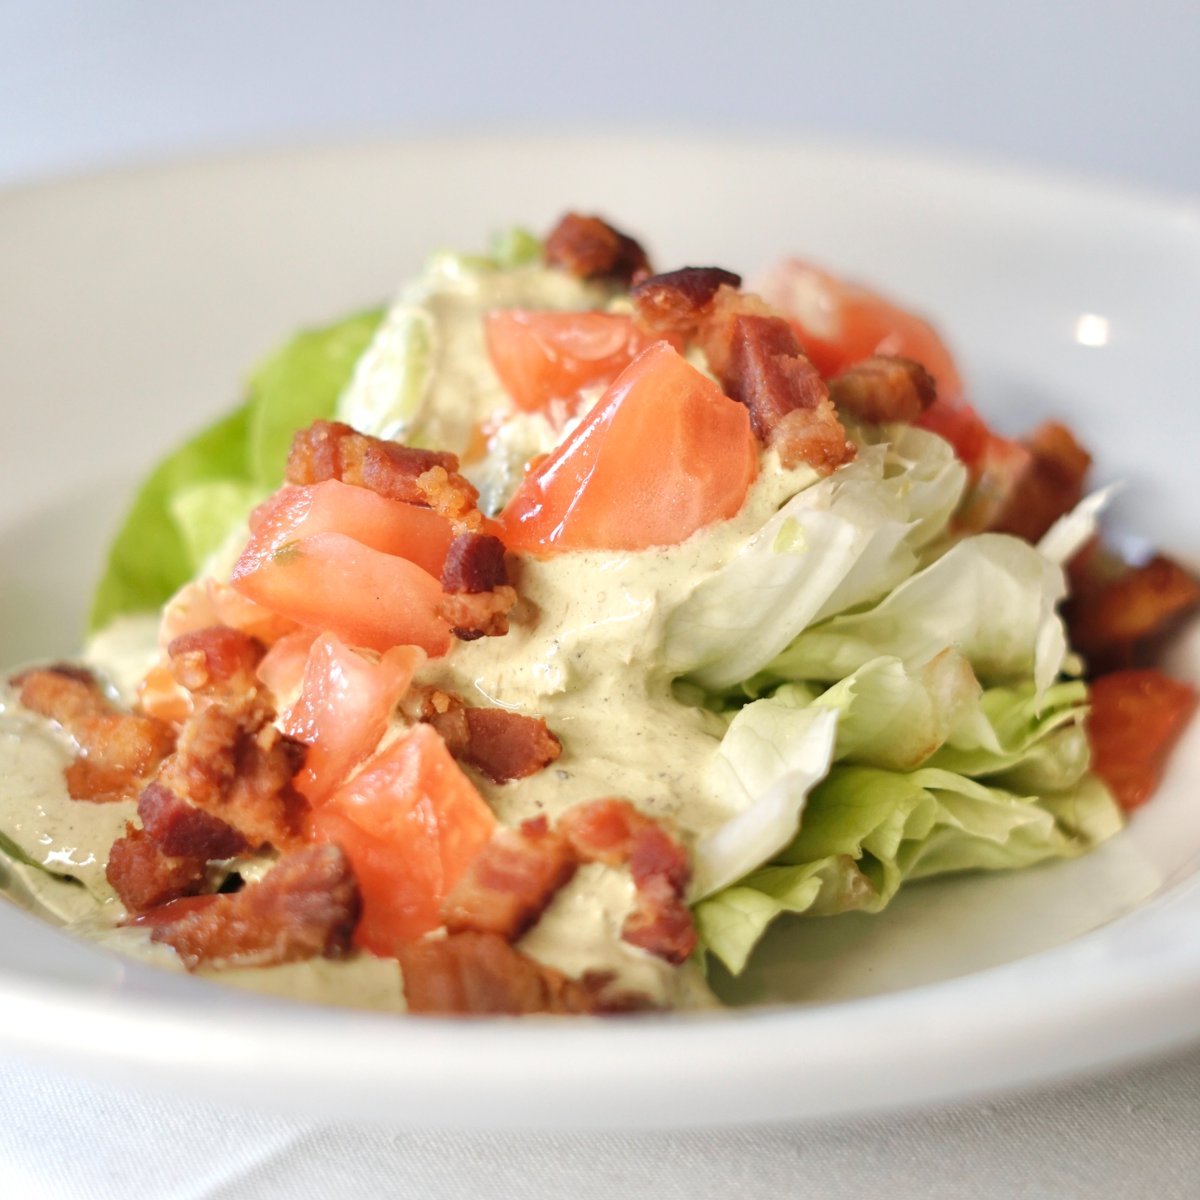 The B.L.T Wedge Salad—a fresh new way to B.L.T. 🥗
 
Discover Apolline's take on a classic, stacked with crisp butter lettuce, rich bacon lardons, ripe heirloom tomatoes, and an aromatic charred scallion vinaigrette. 

#apollinerestaurant #magazinestreet #noladining #neworleans